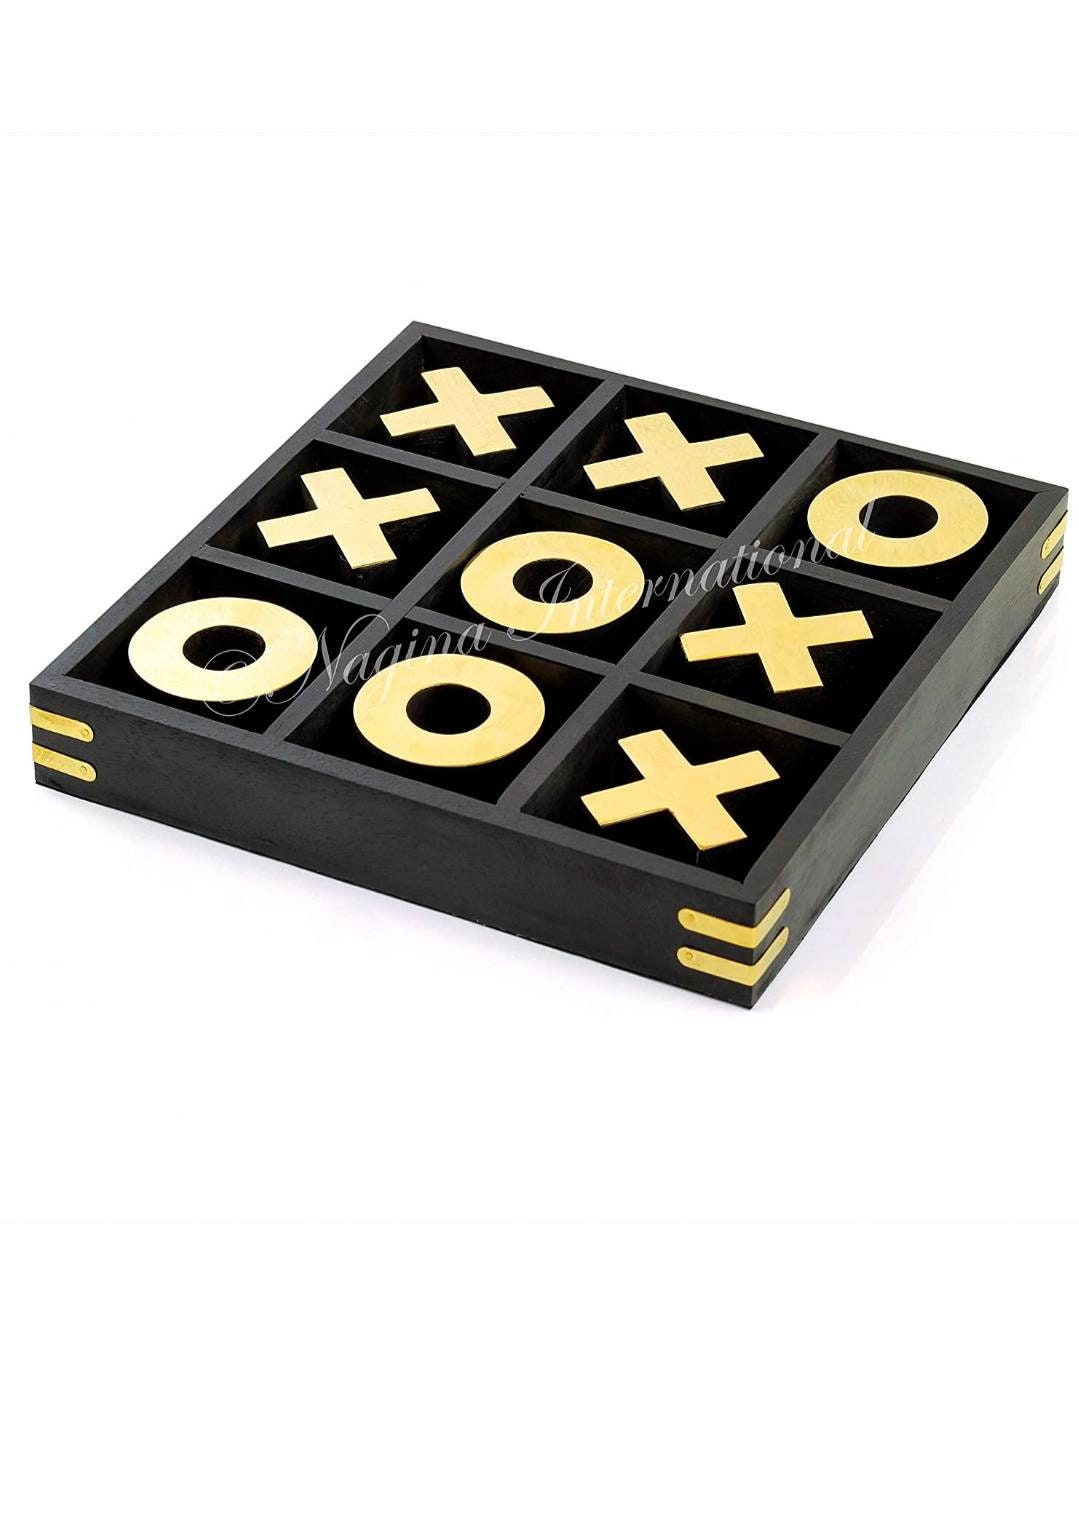 Tic Tac Toe Book: 100 Pages - 900 Games, Tic Tac Toe Game, Large